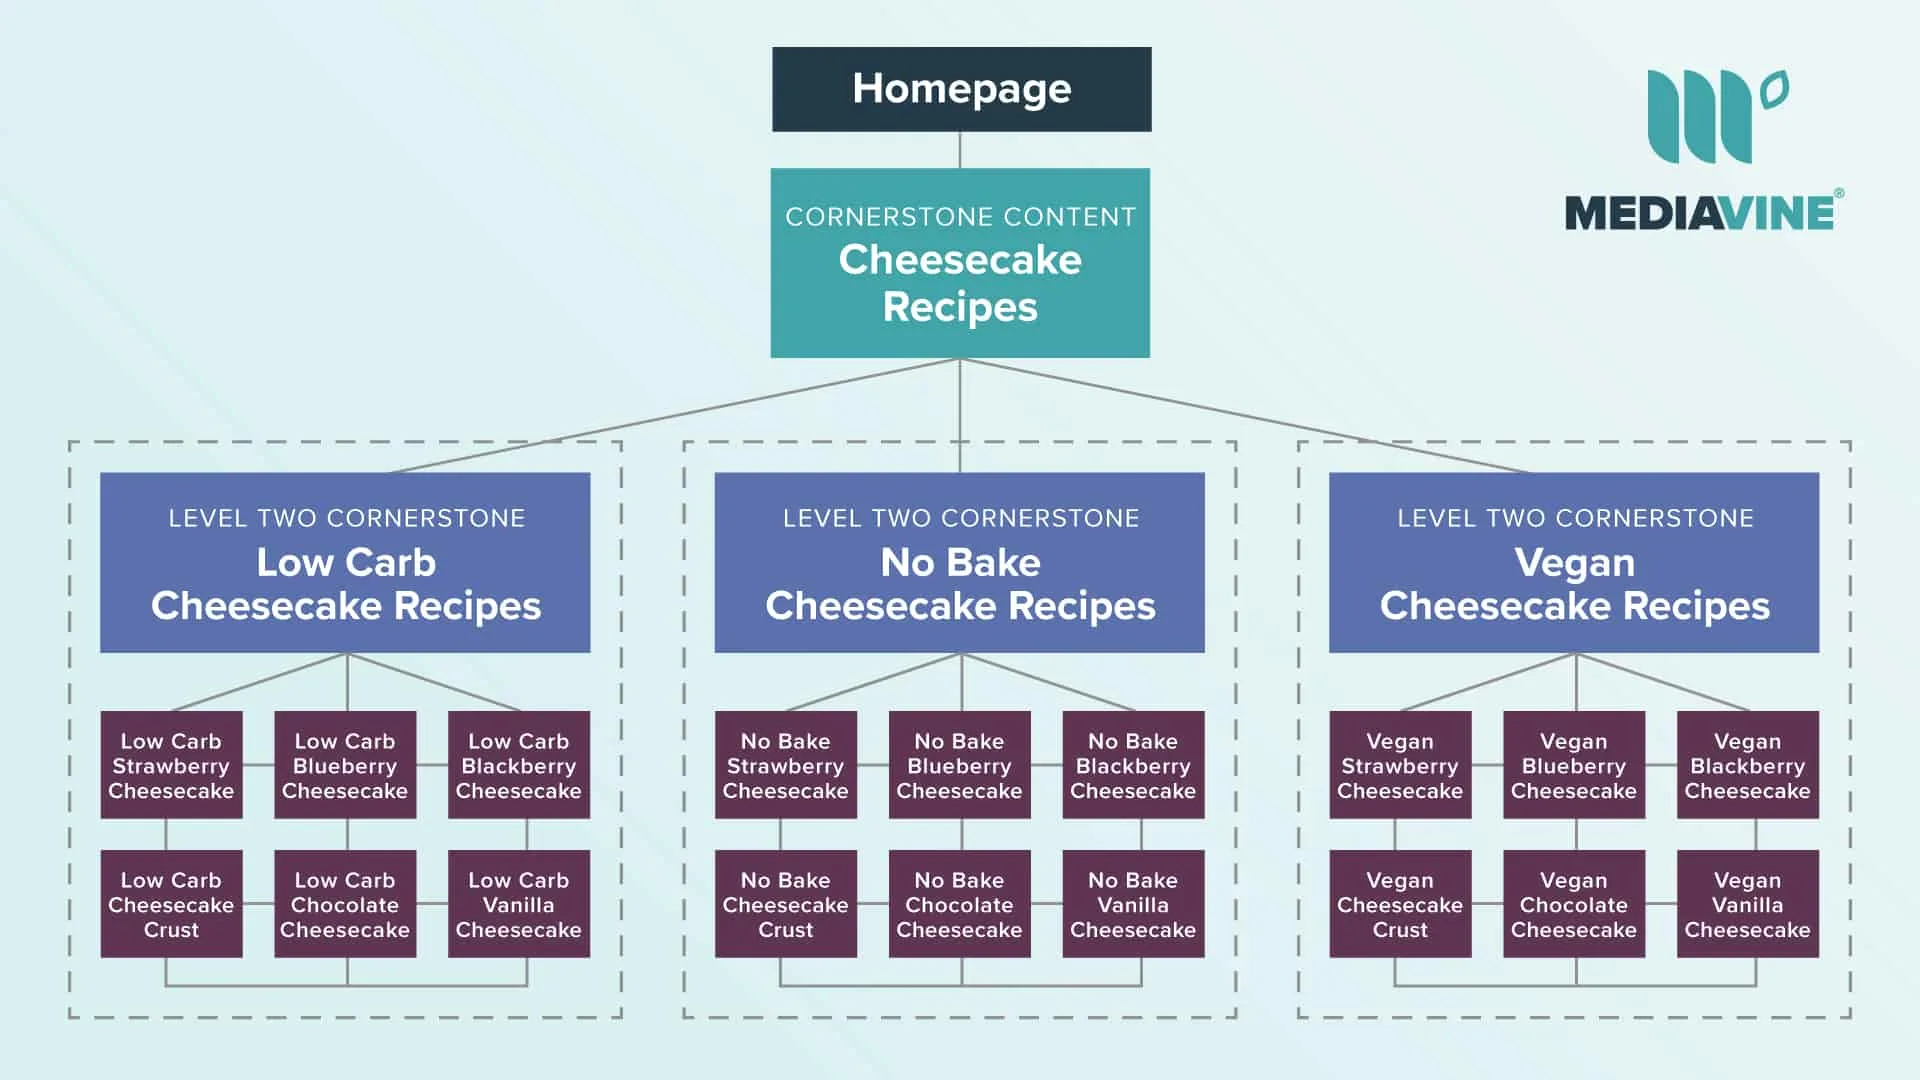 chart explaining cornerstone content with four layers of content, delving into a deeper level